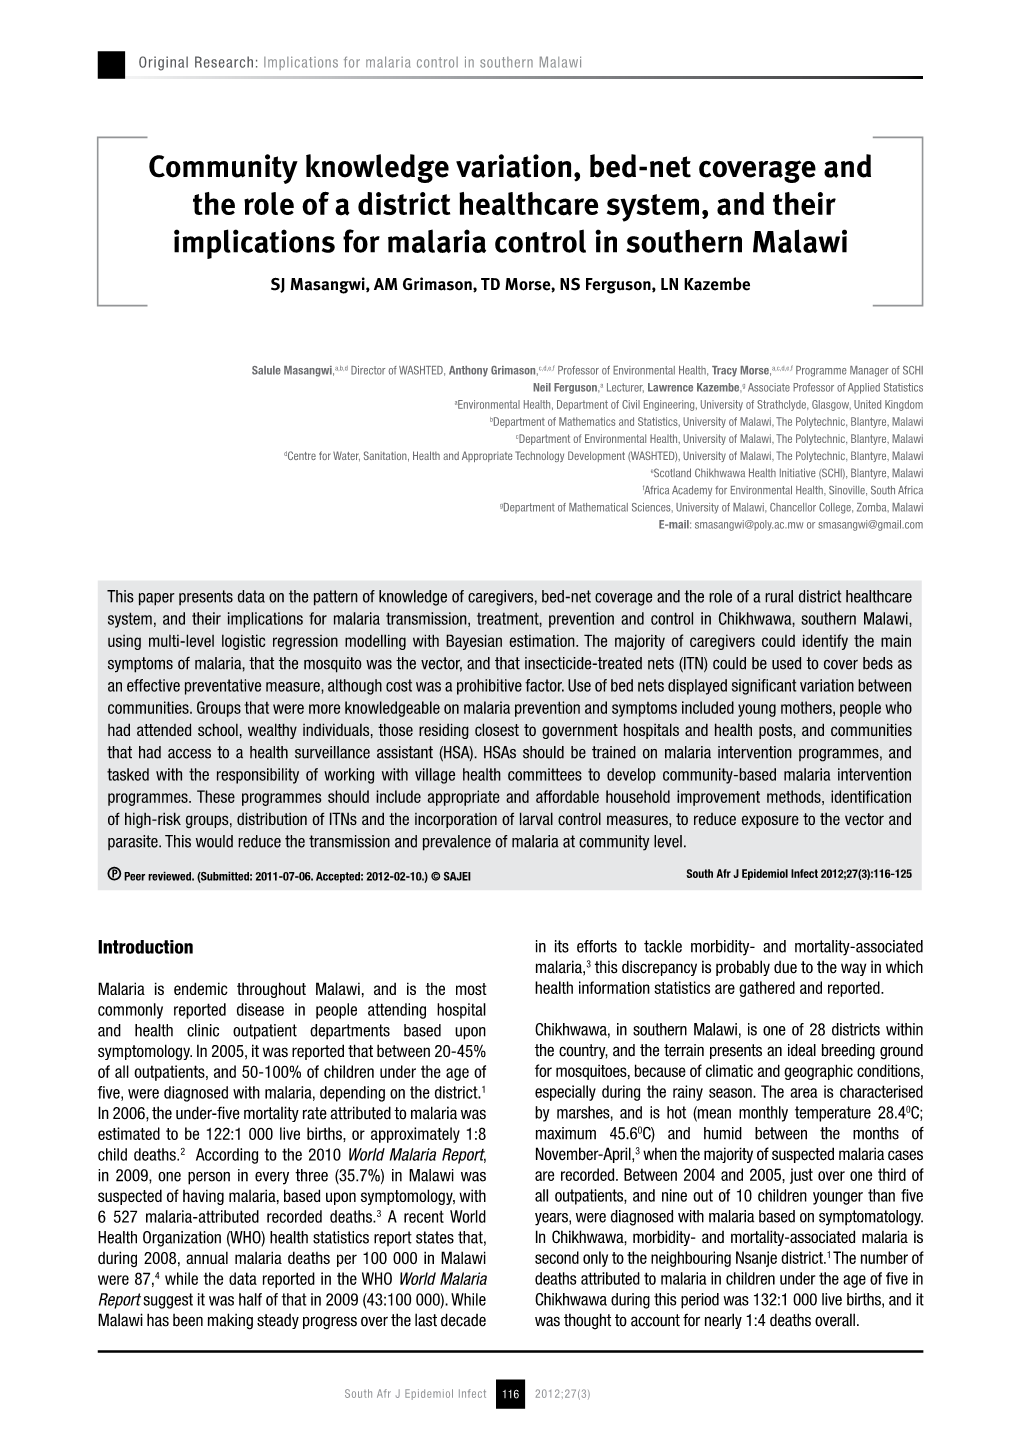 Community Knowledge Variation, Bed-Net Coverage and the Role of a District Healthcare System, and Their Implications for Malaria Control in Southern Malawi